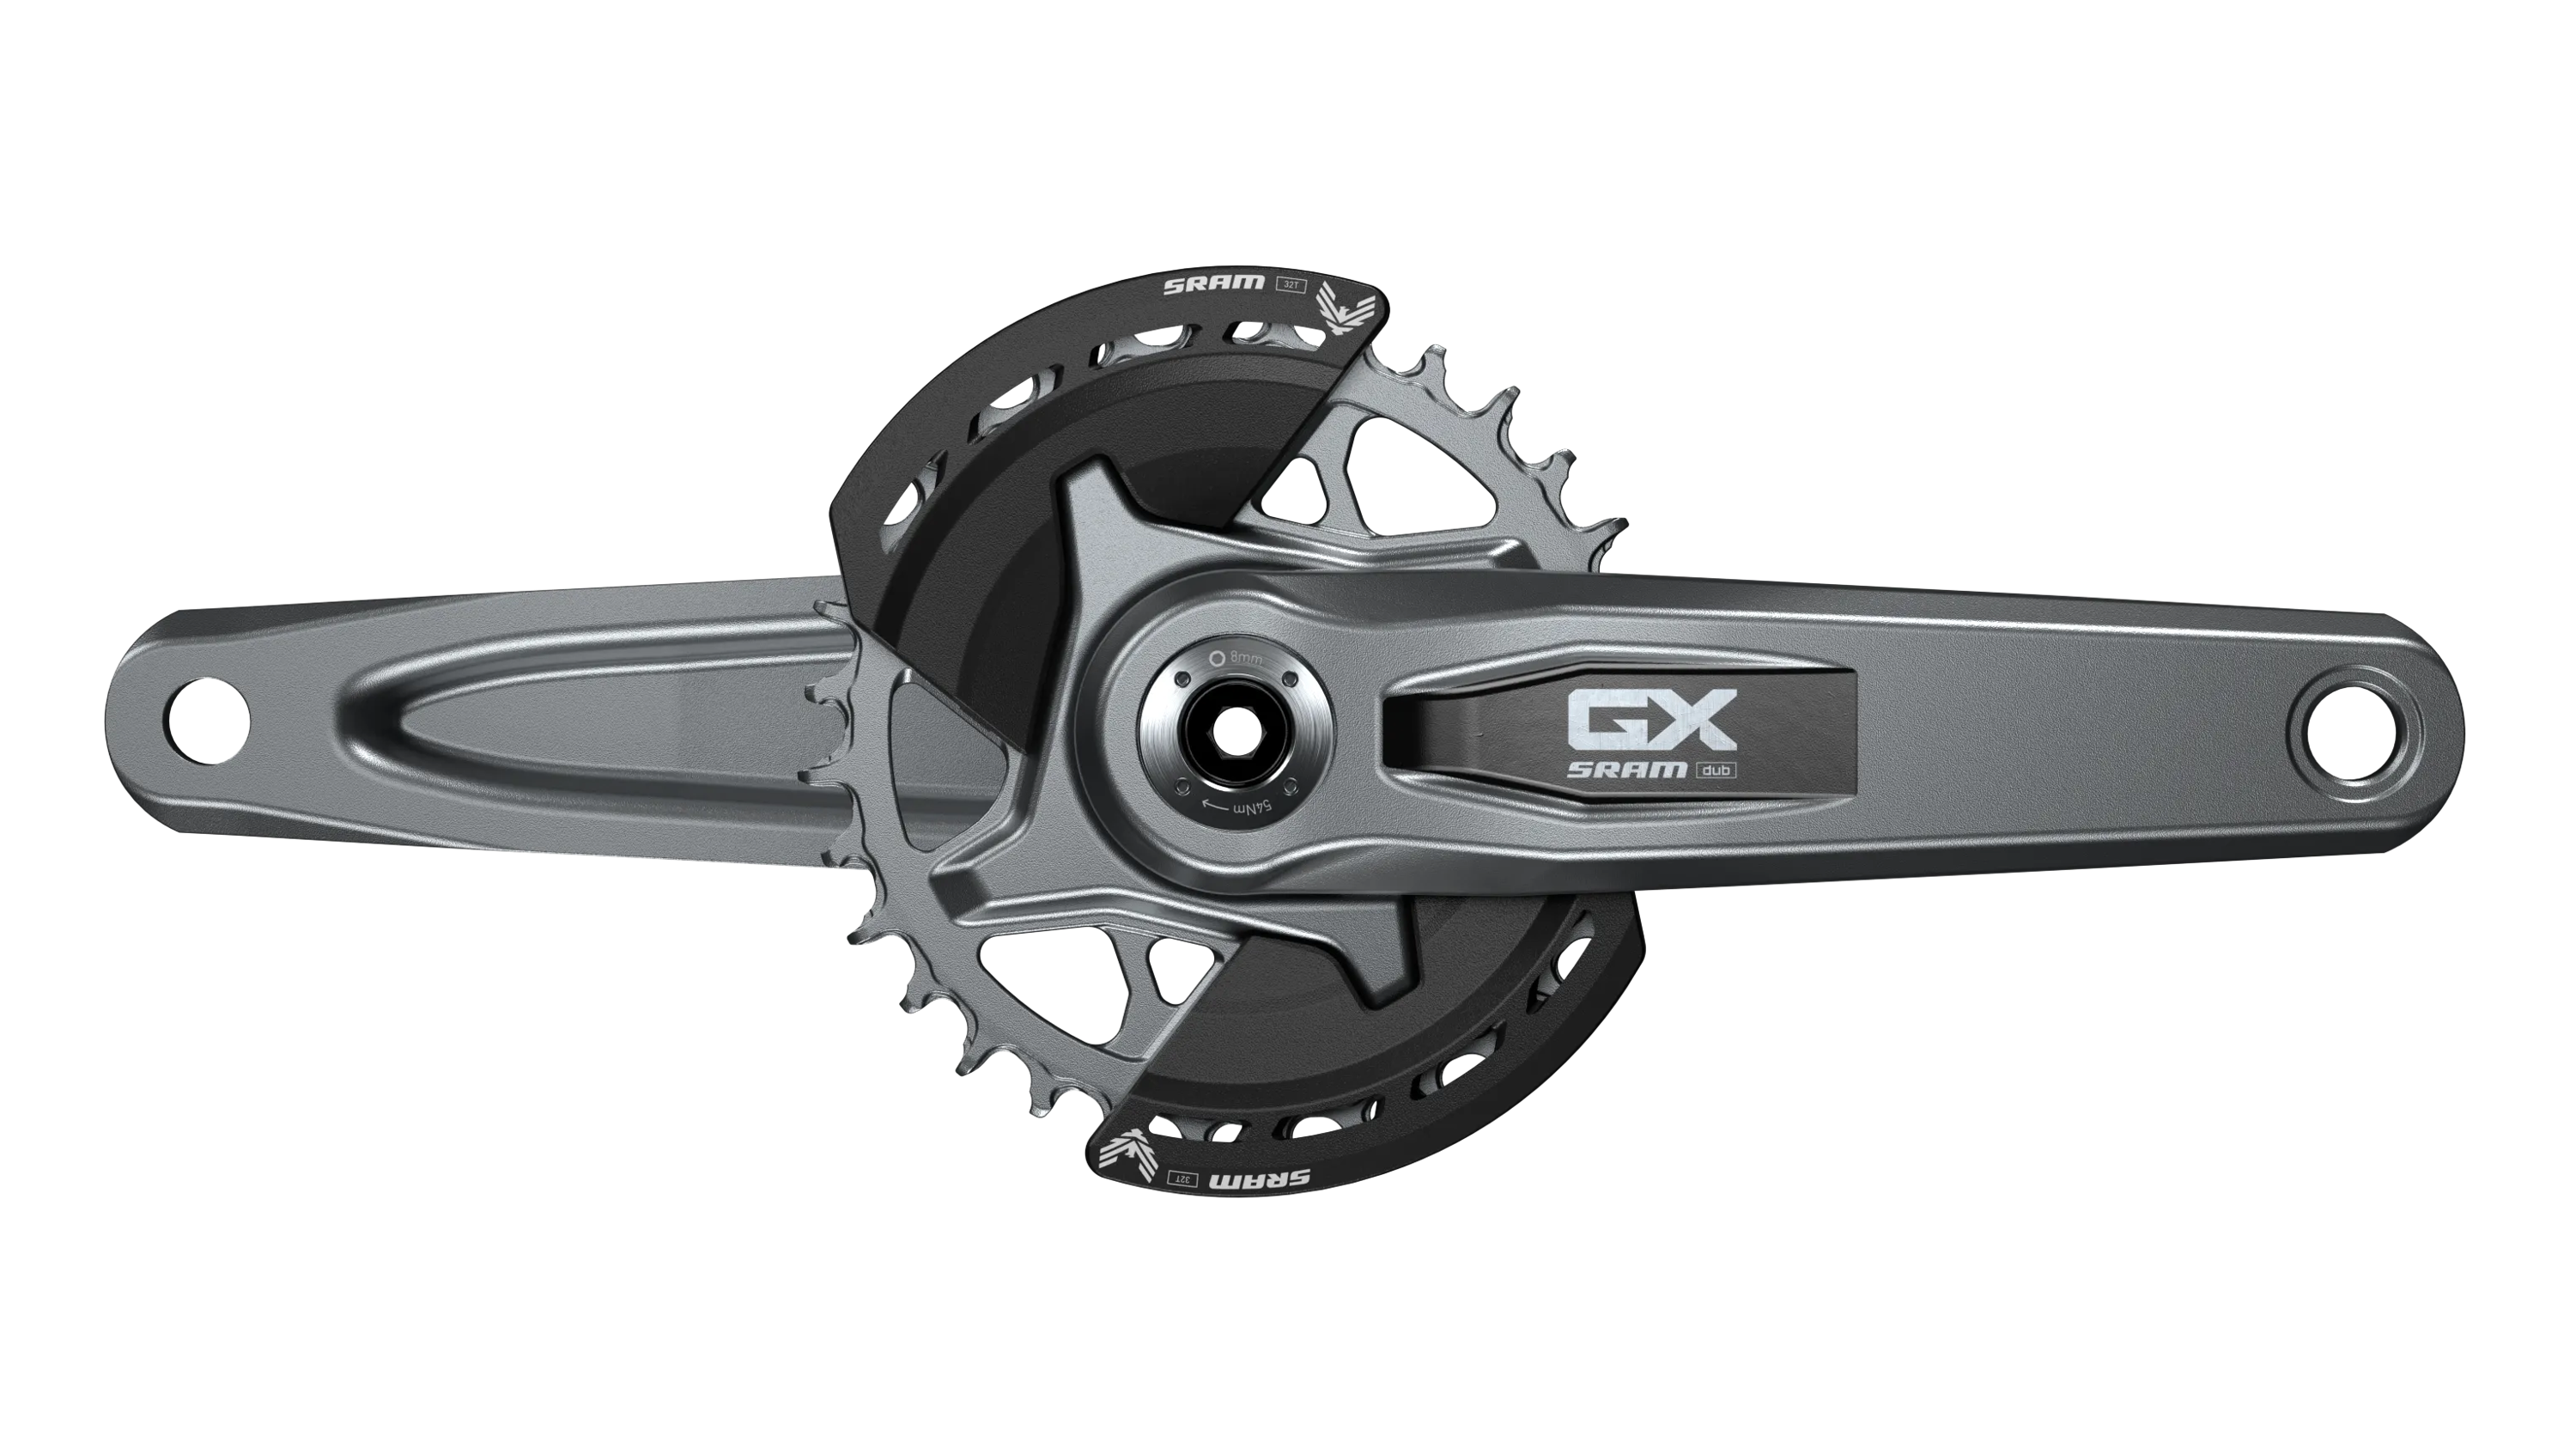 sram gx eagle transmission crankset and chainring with bash guards on a white background